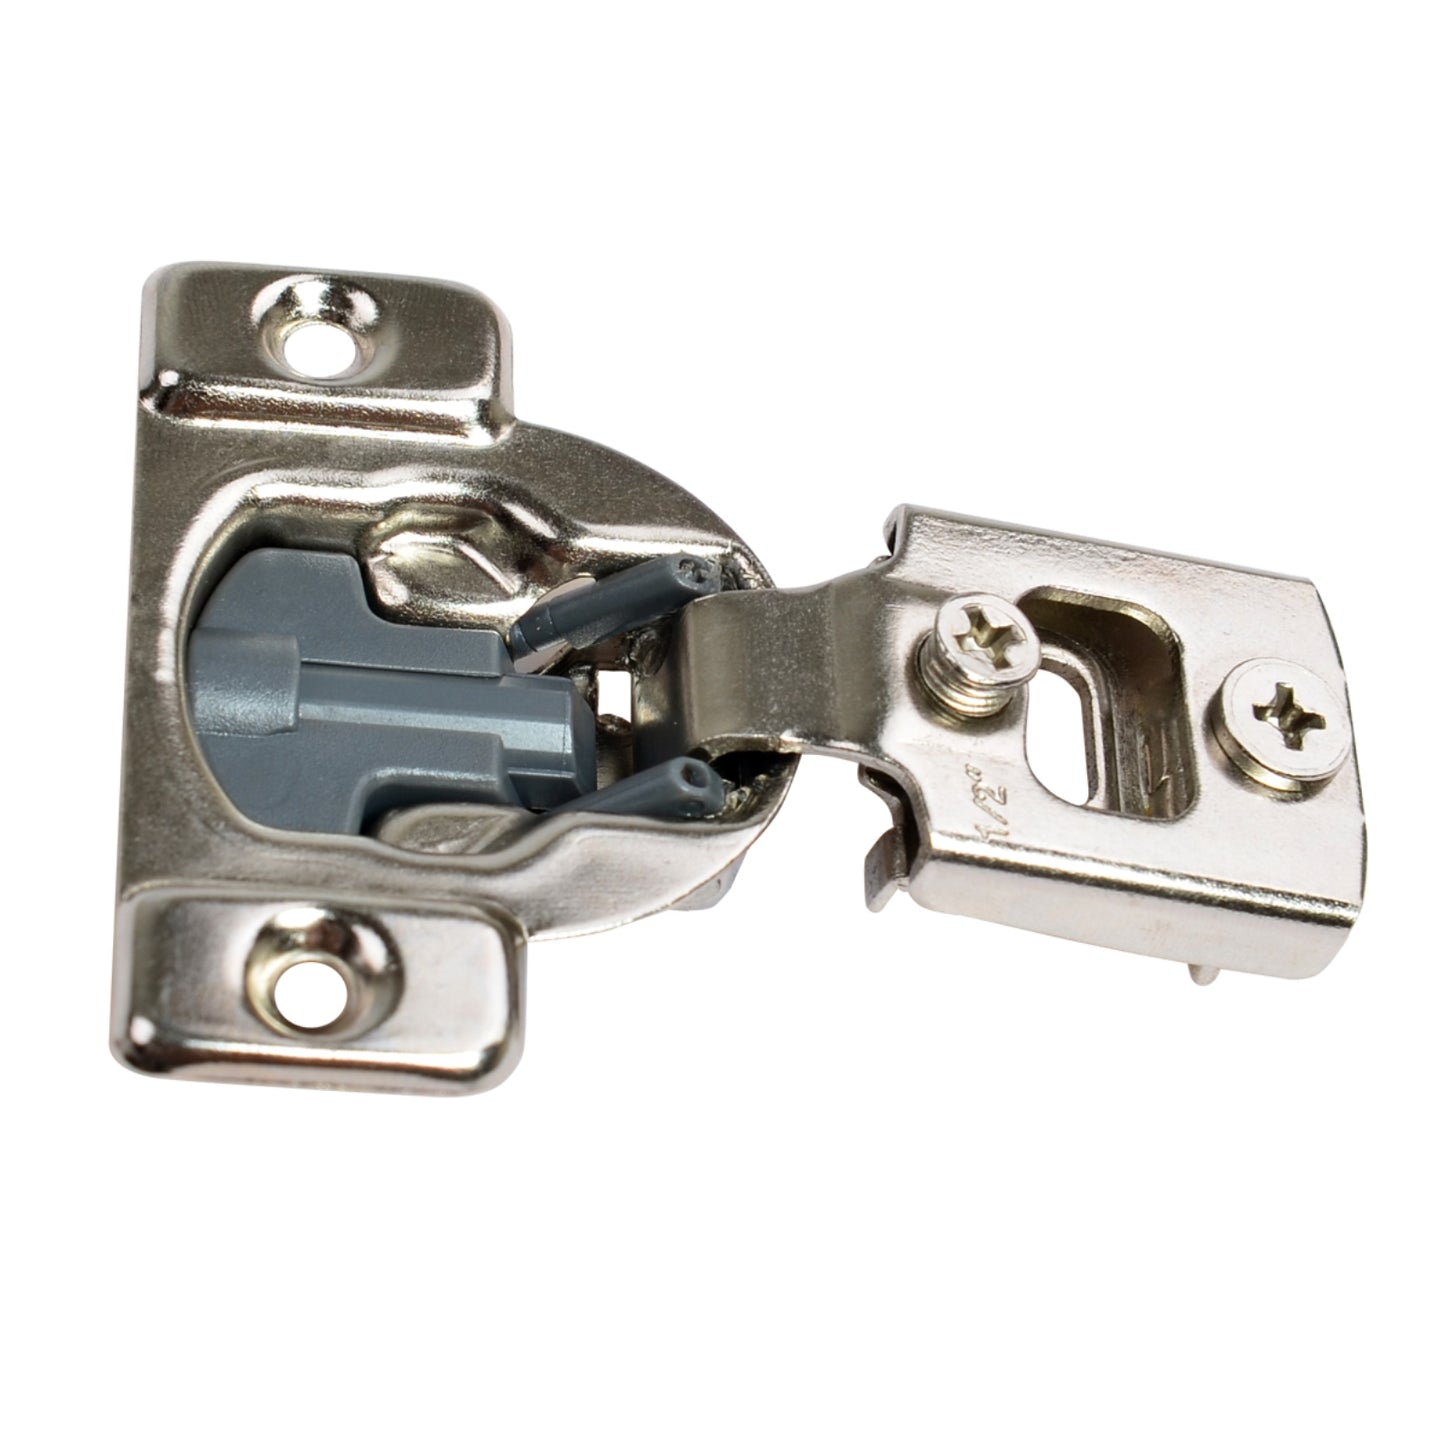 South Main Hardware 108 Degree Compact 1/2-inch Overlay Soft-Close Cabinet Hinge, 35mm Face Frame, Nickel Plated Finish, 5-Pairs